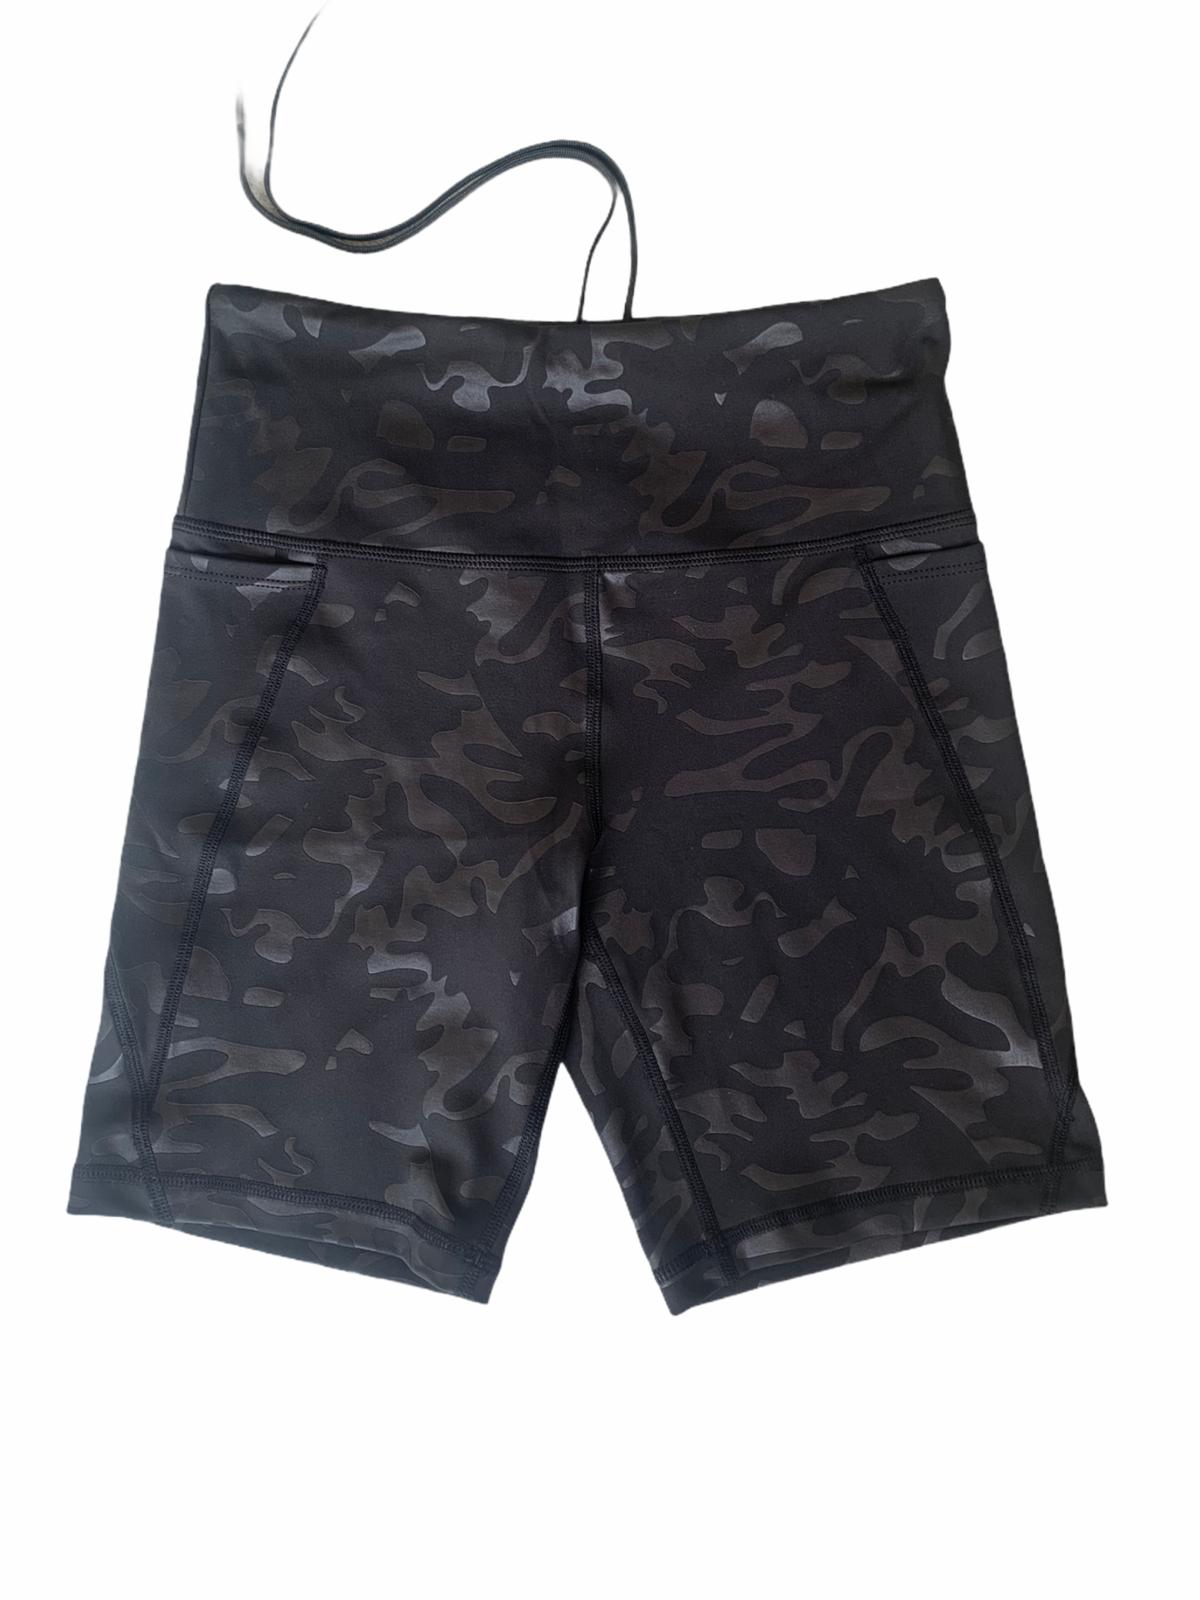 Black Ops 7 Inch Shorts